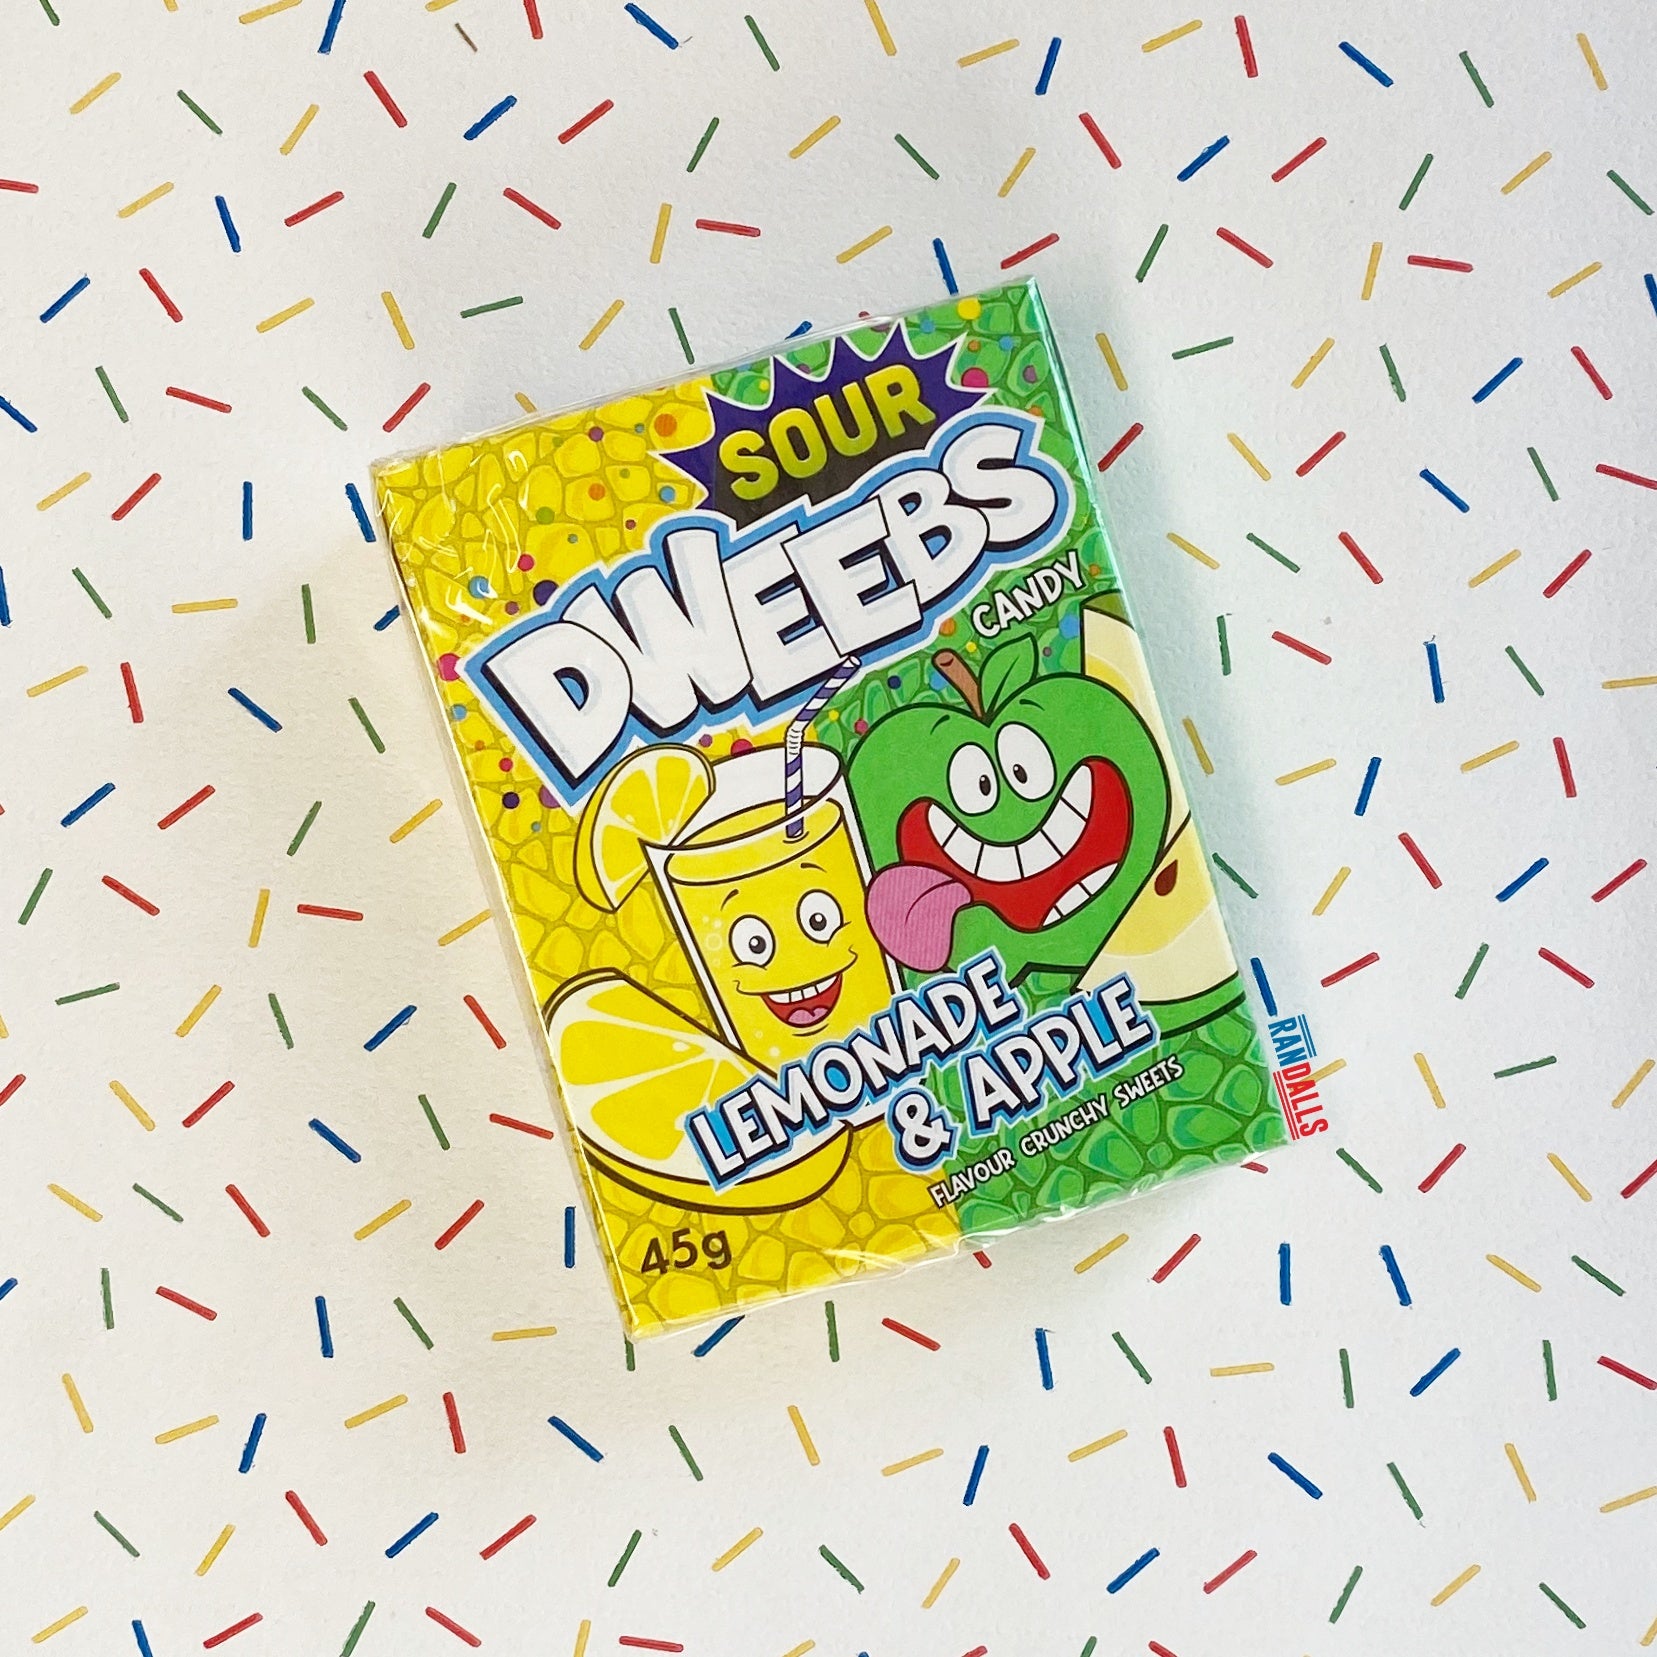 dweebs sour lemonade and apple, sweets, candy, nerds, sour, sugar, nerds, usa, randalls